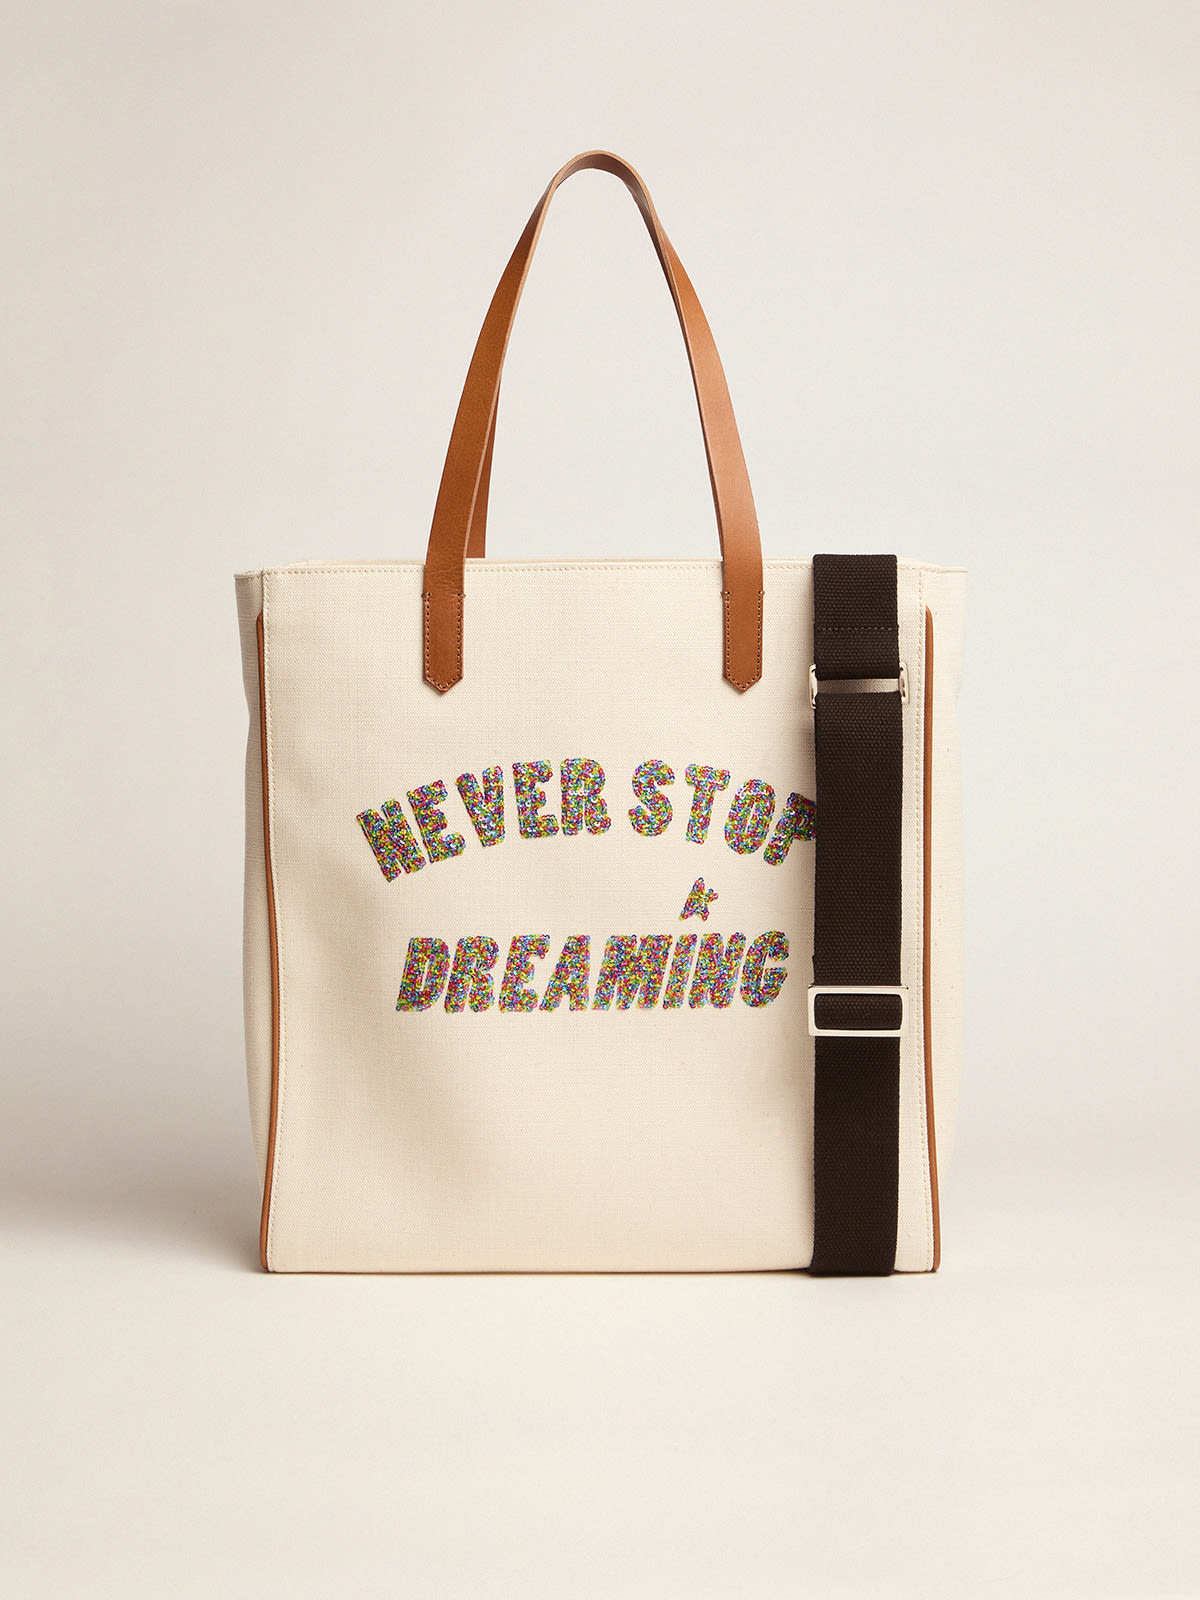 Golden Goose - California North-South Never Stop Dreaming glitter bag in 